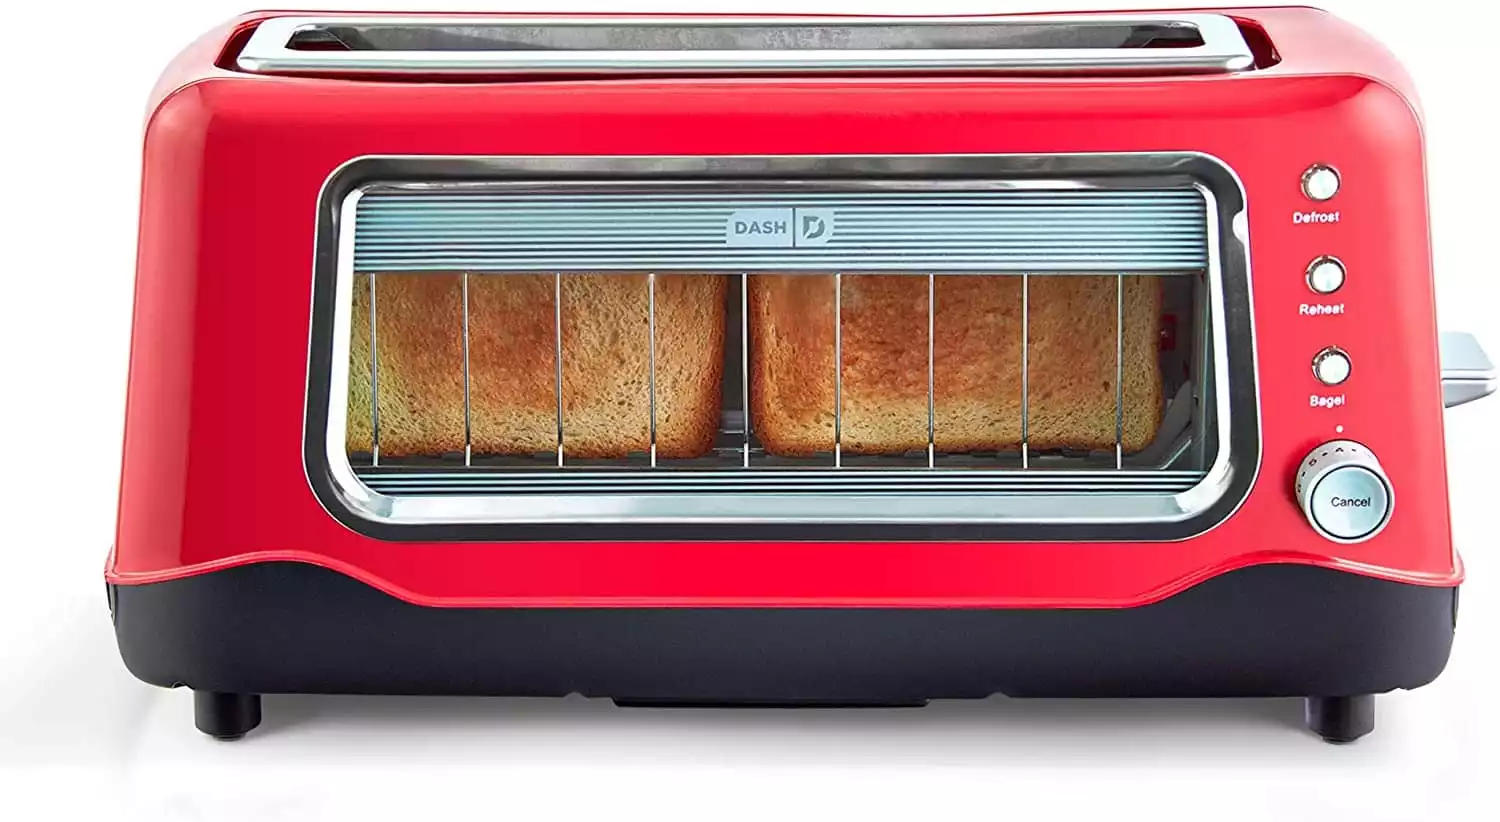 Dash Clear View Extra Wide Slot Toaster with Stainless Steel Accents